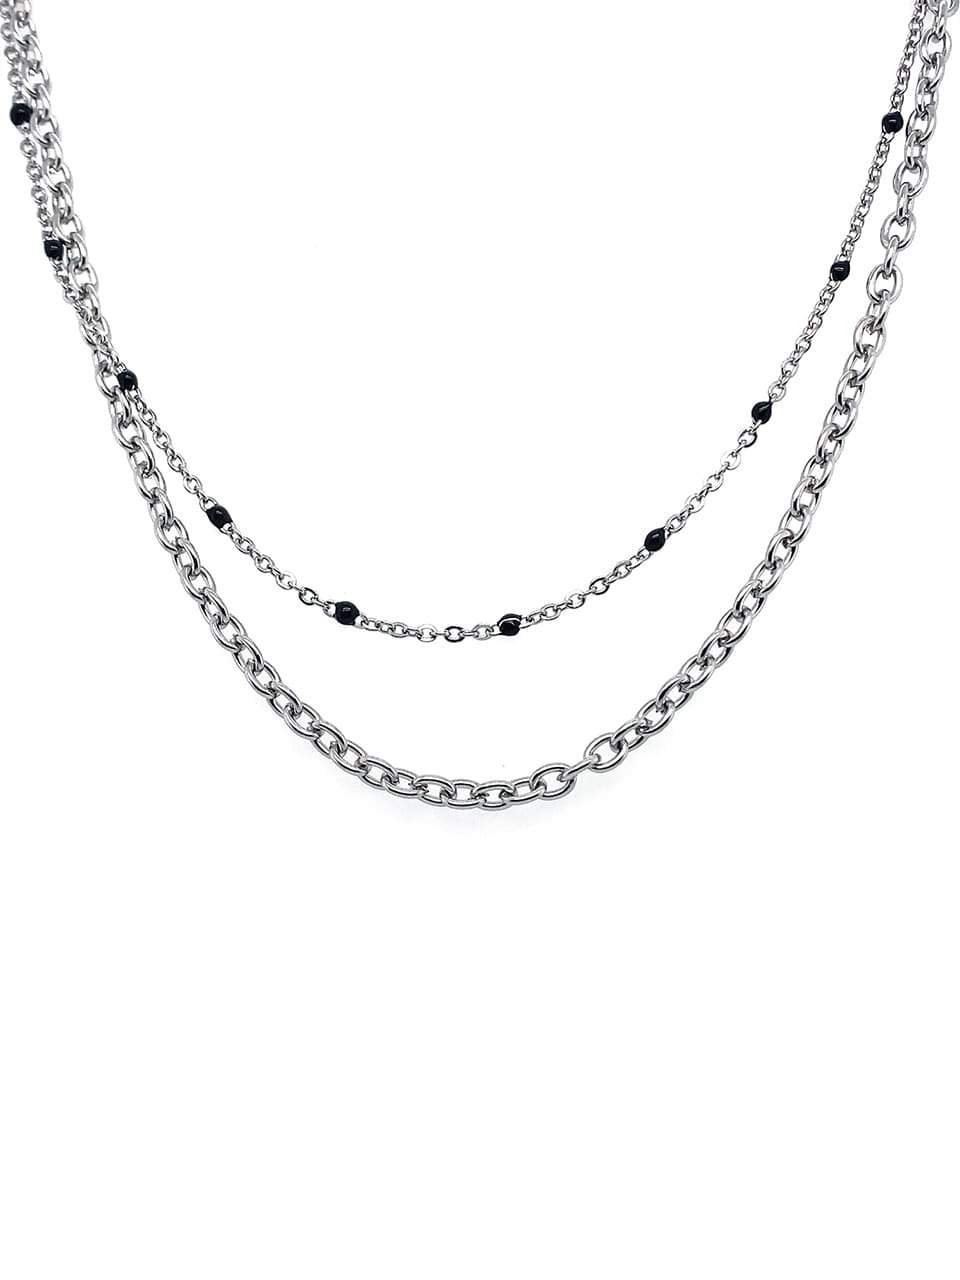 BHS210 Black Beads Layered Chain Necklace